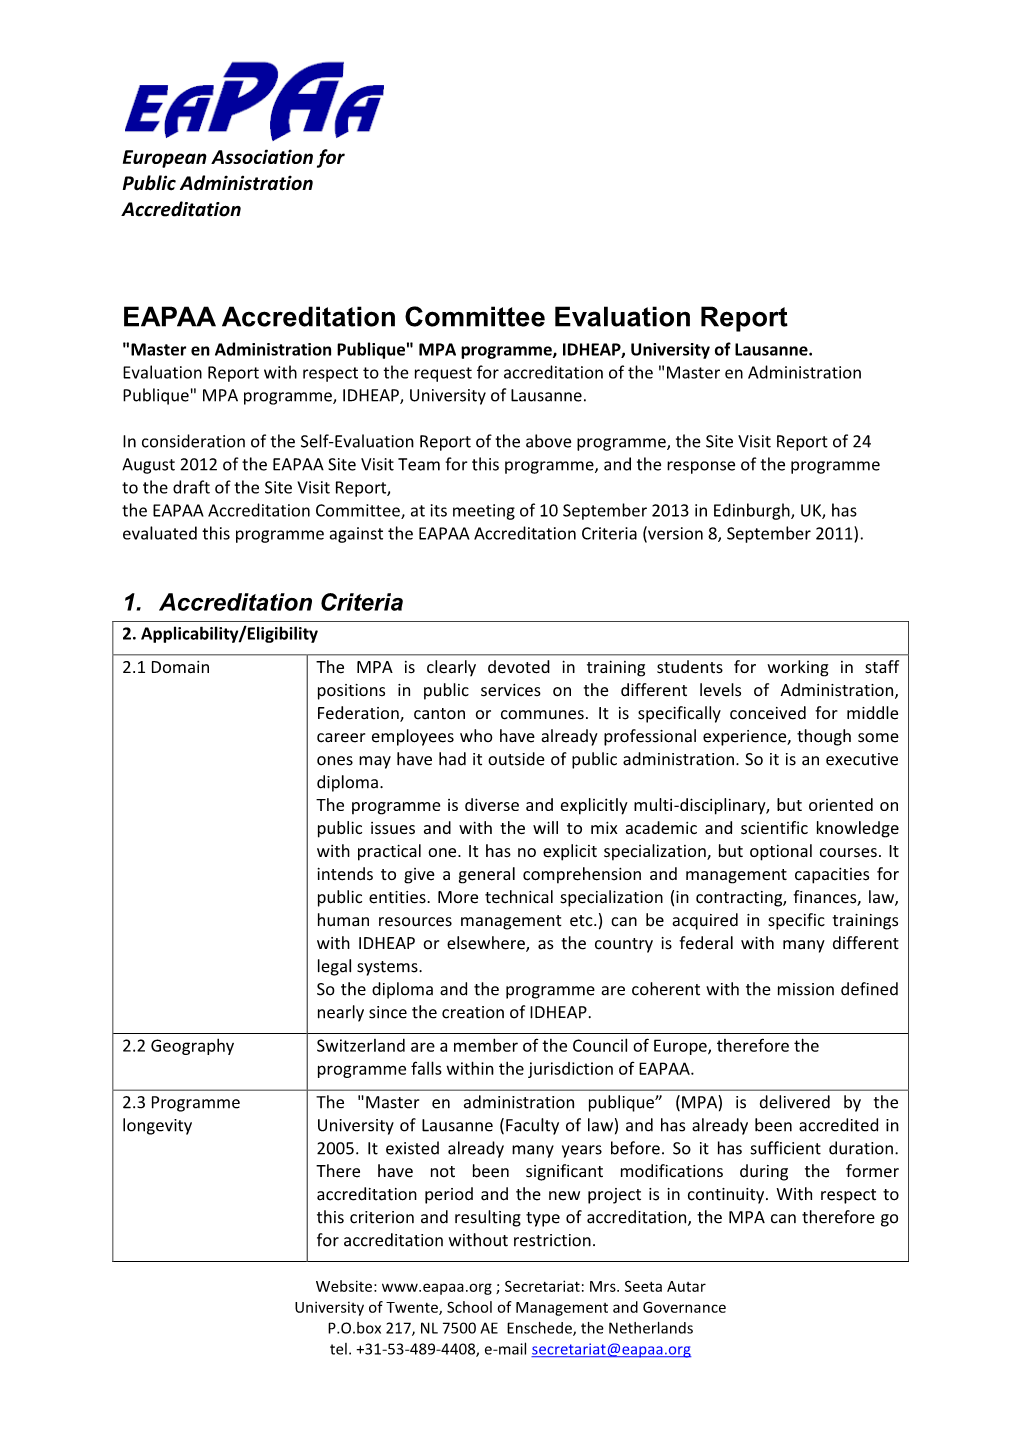 EAPAA Accreditation Committee Evaluation Report "Master En Administration Publique" MPA Programme, IDHEAP, University of Lausanne